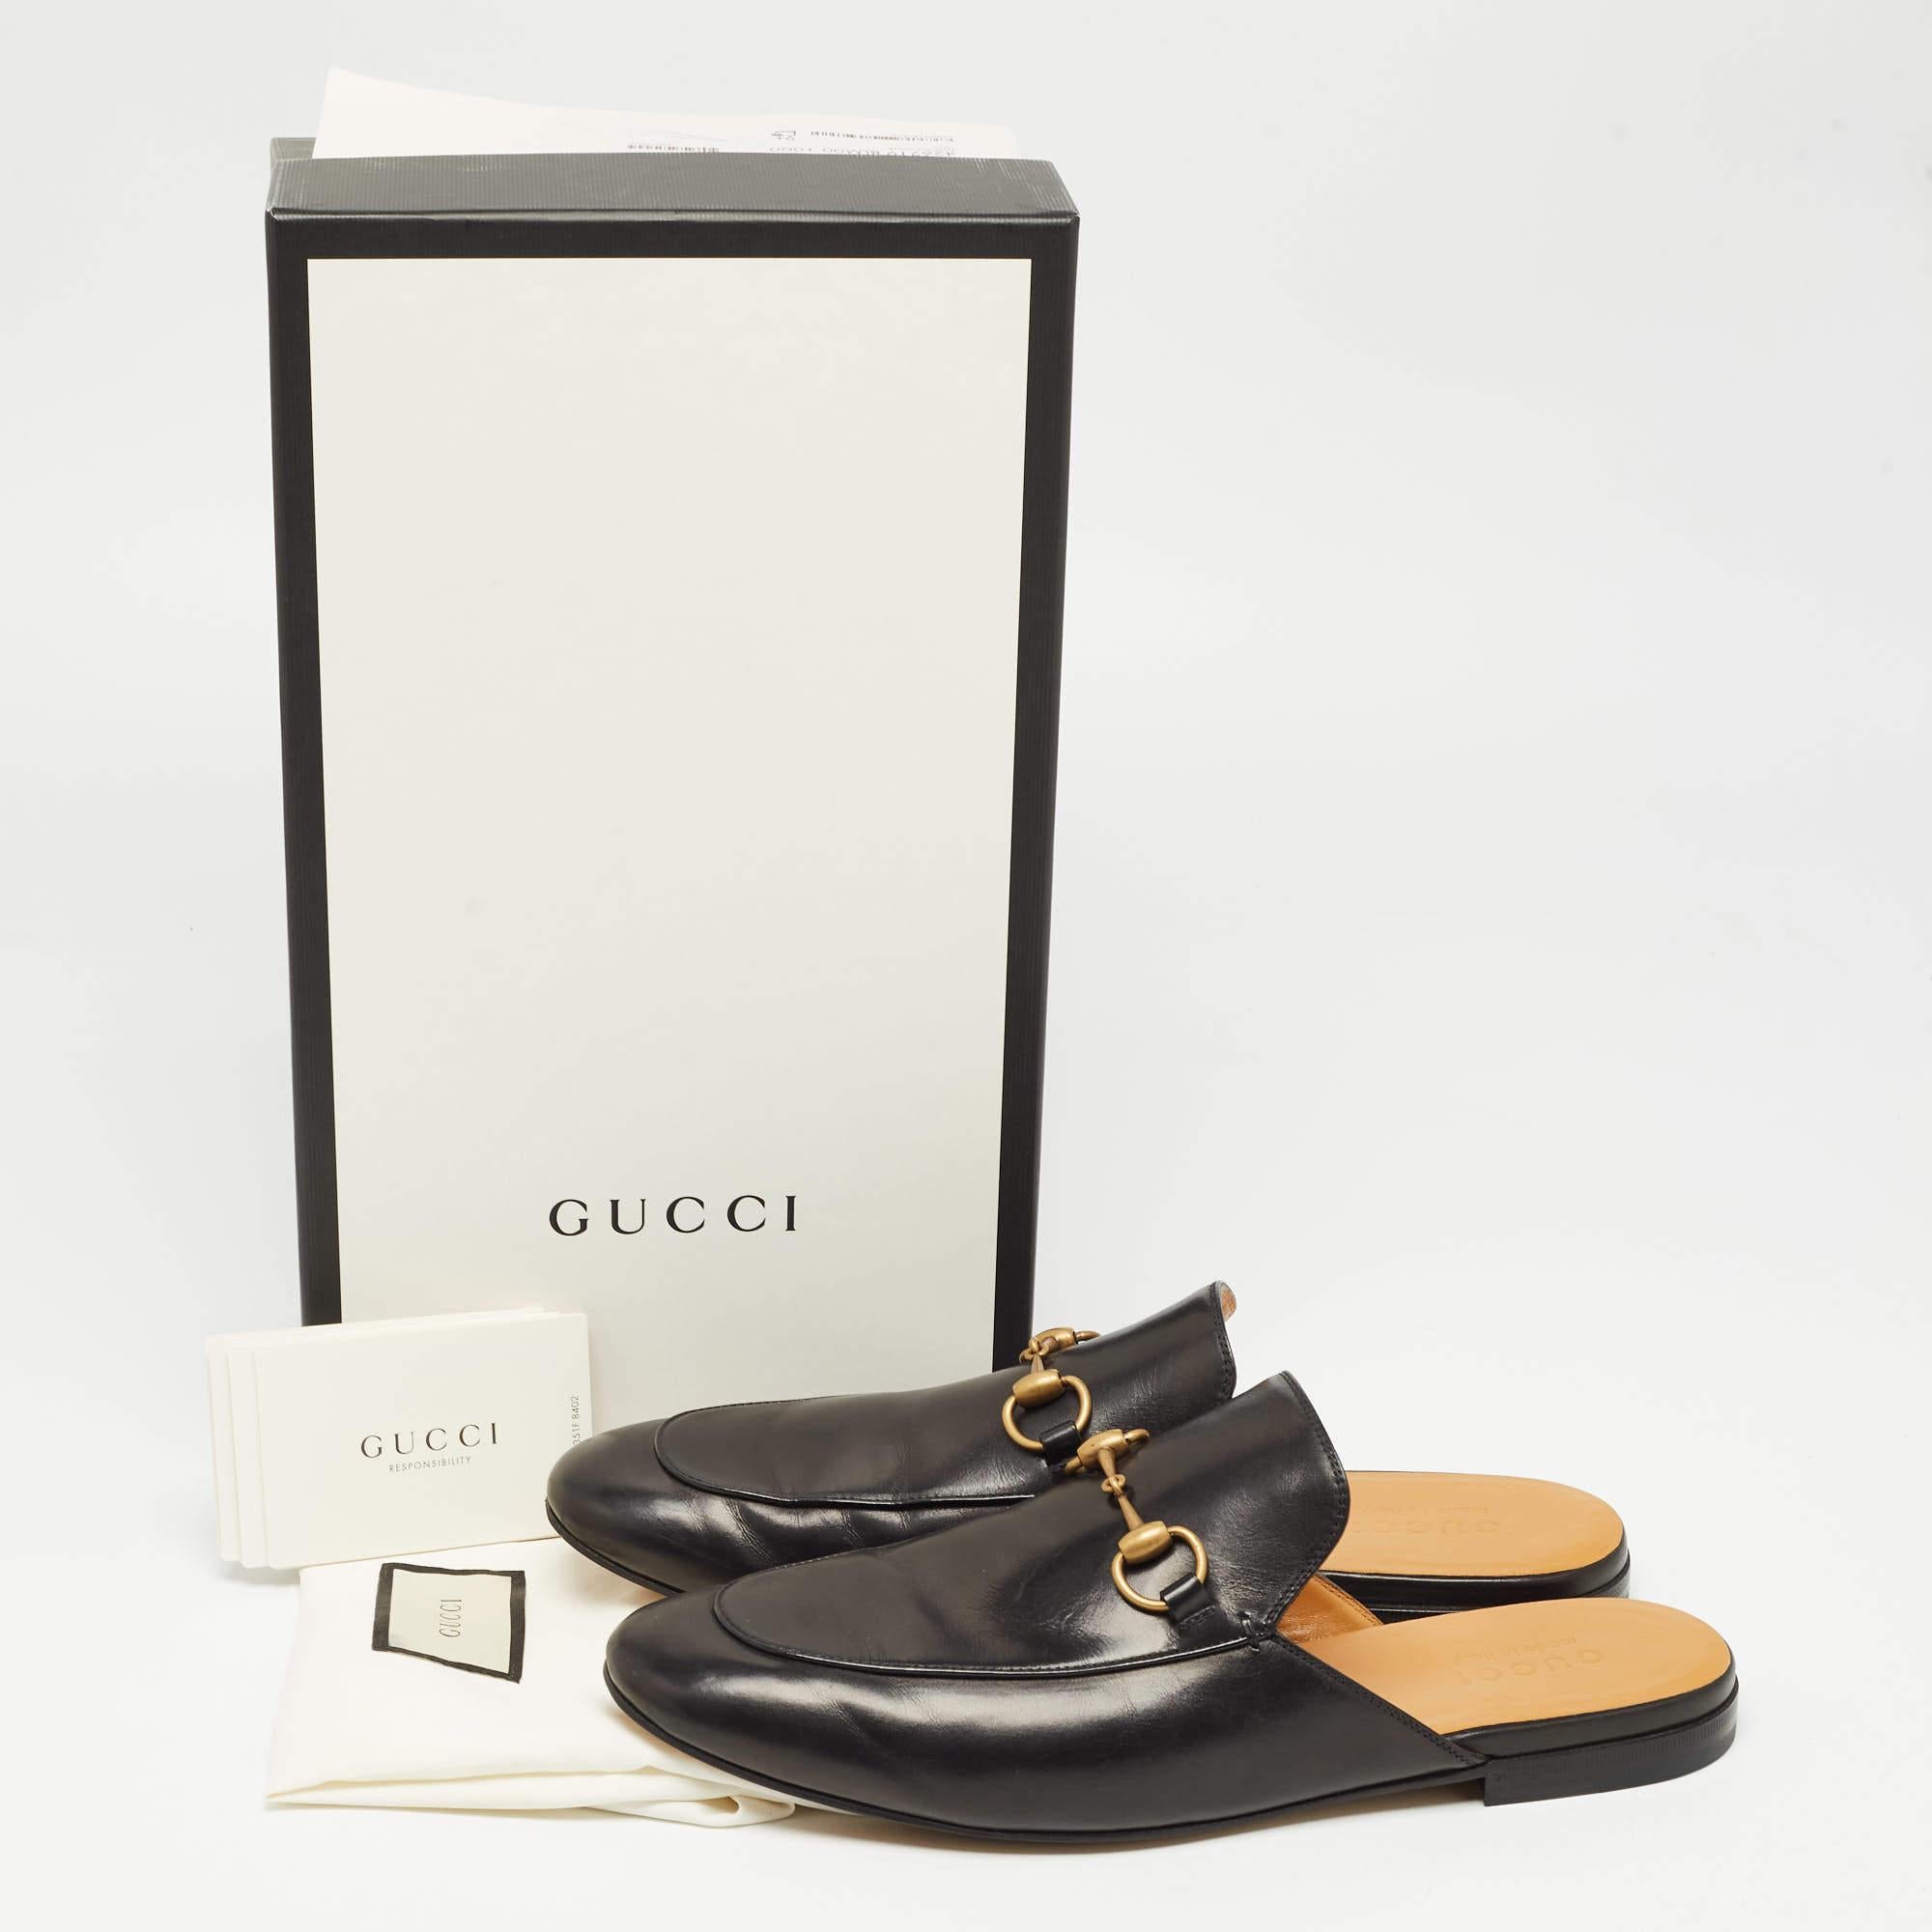 Gucci Black Leather Princetown Mules Size 43.5 5